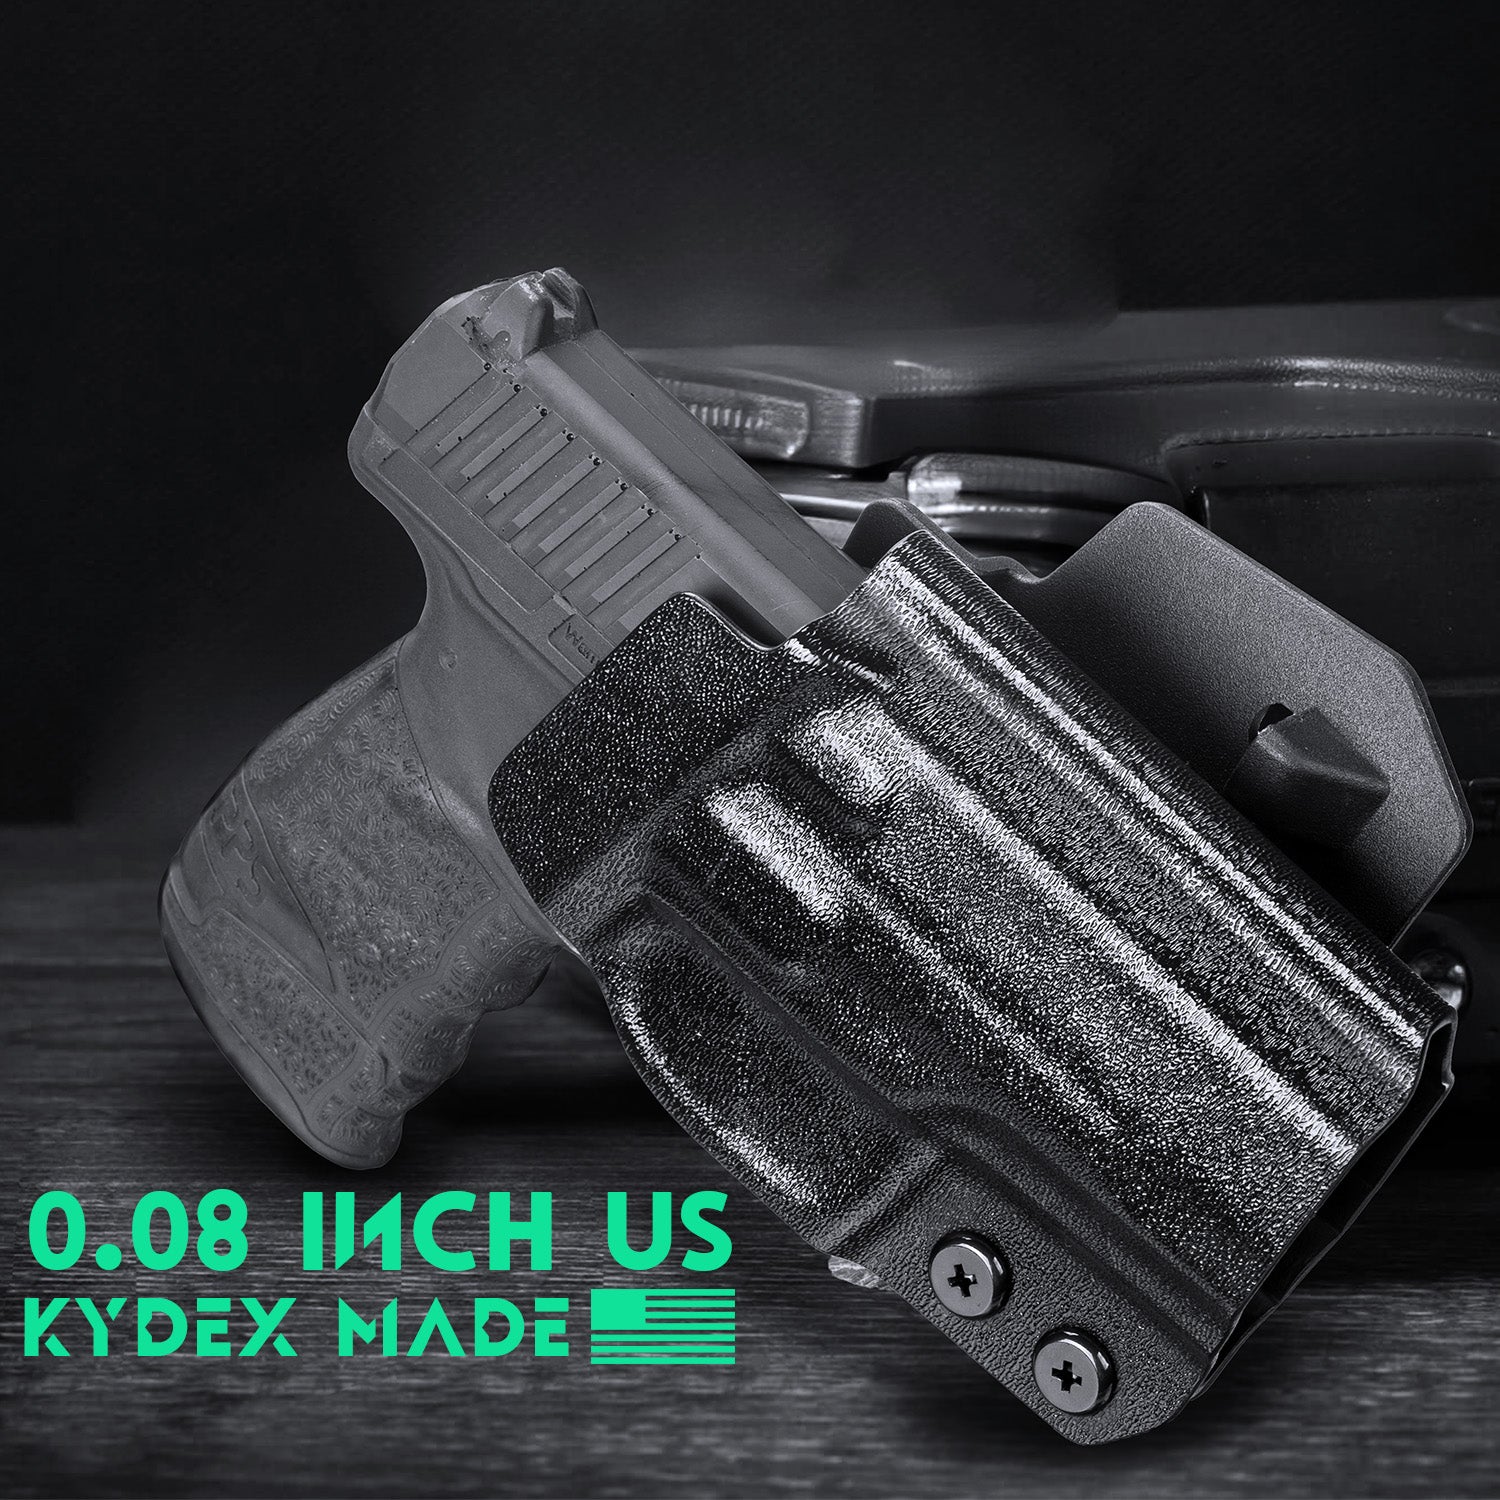 Walther PPS M2 OWB Holster Kydex Made Optics Cut: Walther PPS M2 Pistol, Outside Waistband Open Carry PPS M2 Holster with 1.75 Inch Paddle, Adj. Retention & Cant, Right Hand|WARRIORLAND